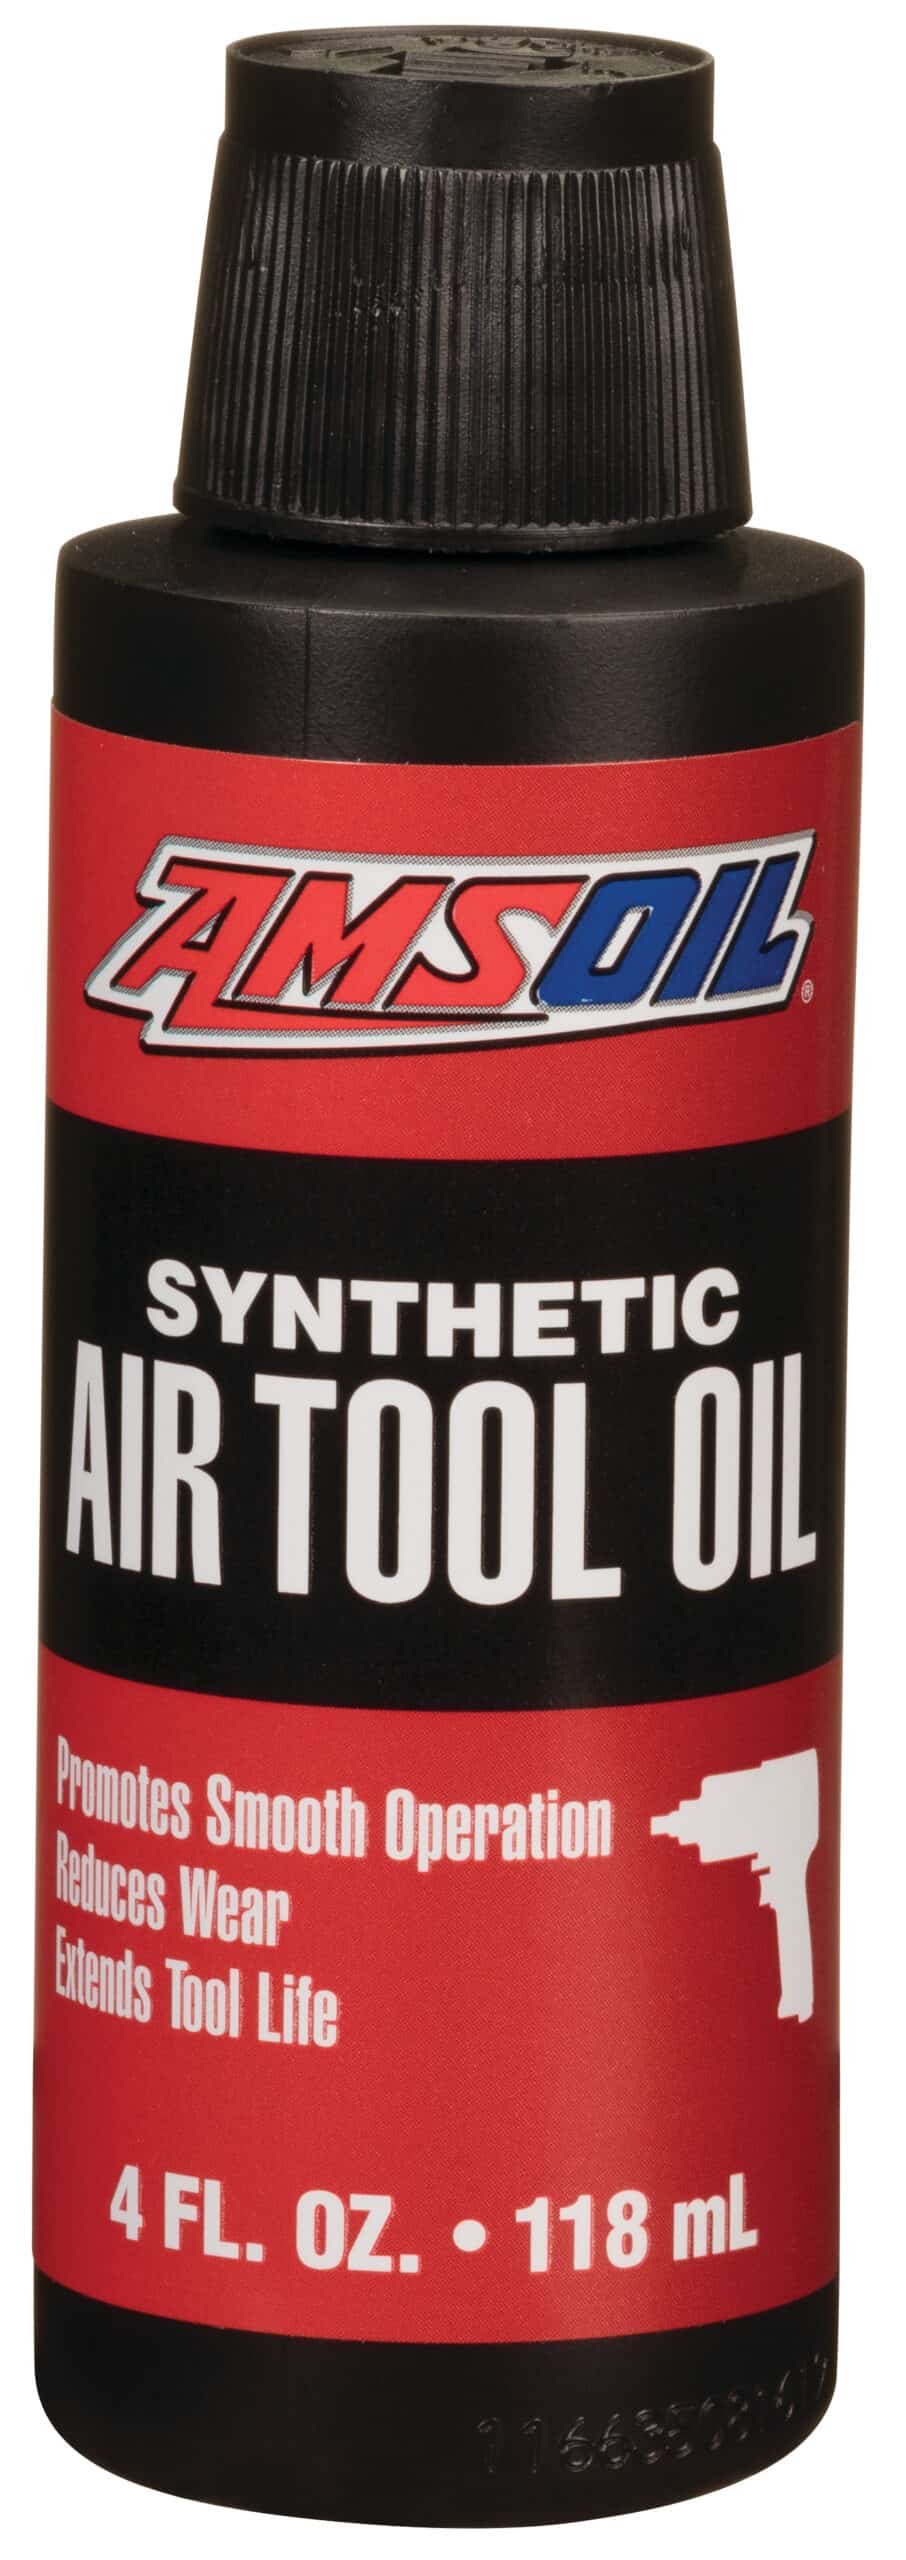 Synthetic Air Tool Oil AIRBA scaled